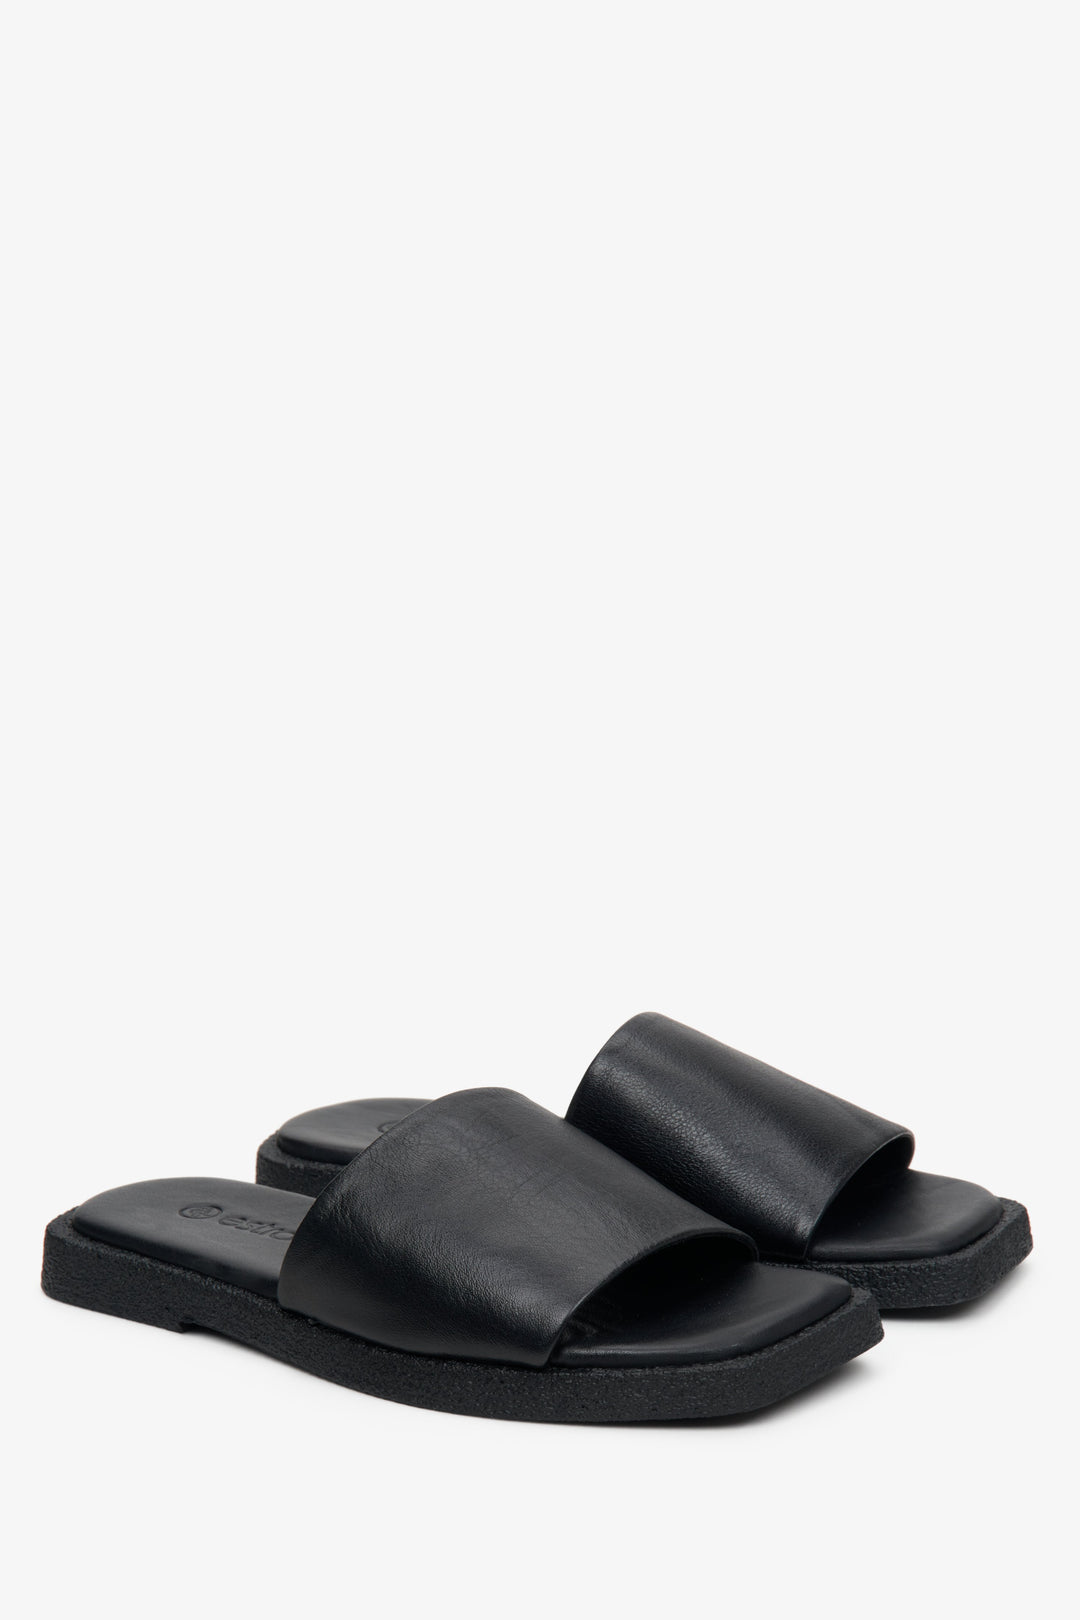 Women's black slides made of Italian leather - presentation of the top and side seam of the shoes.